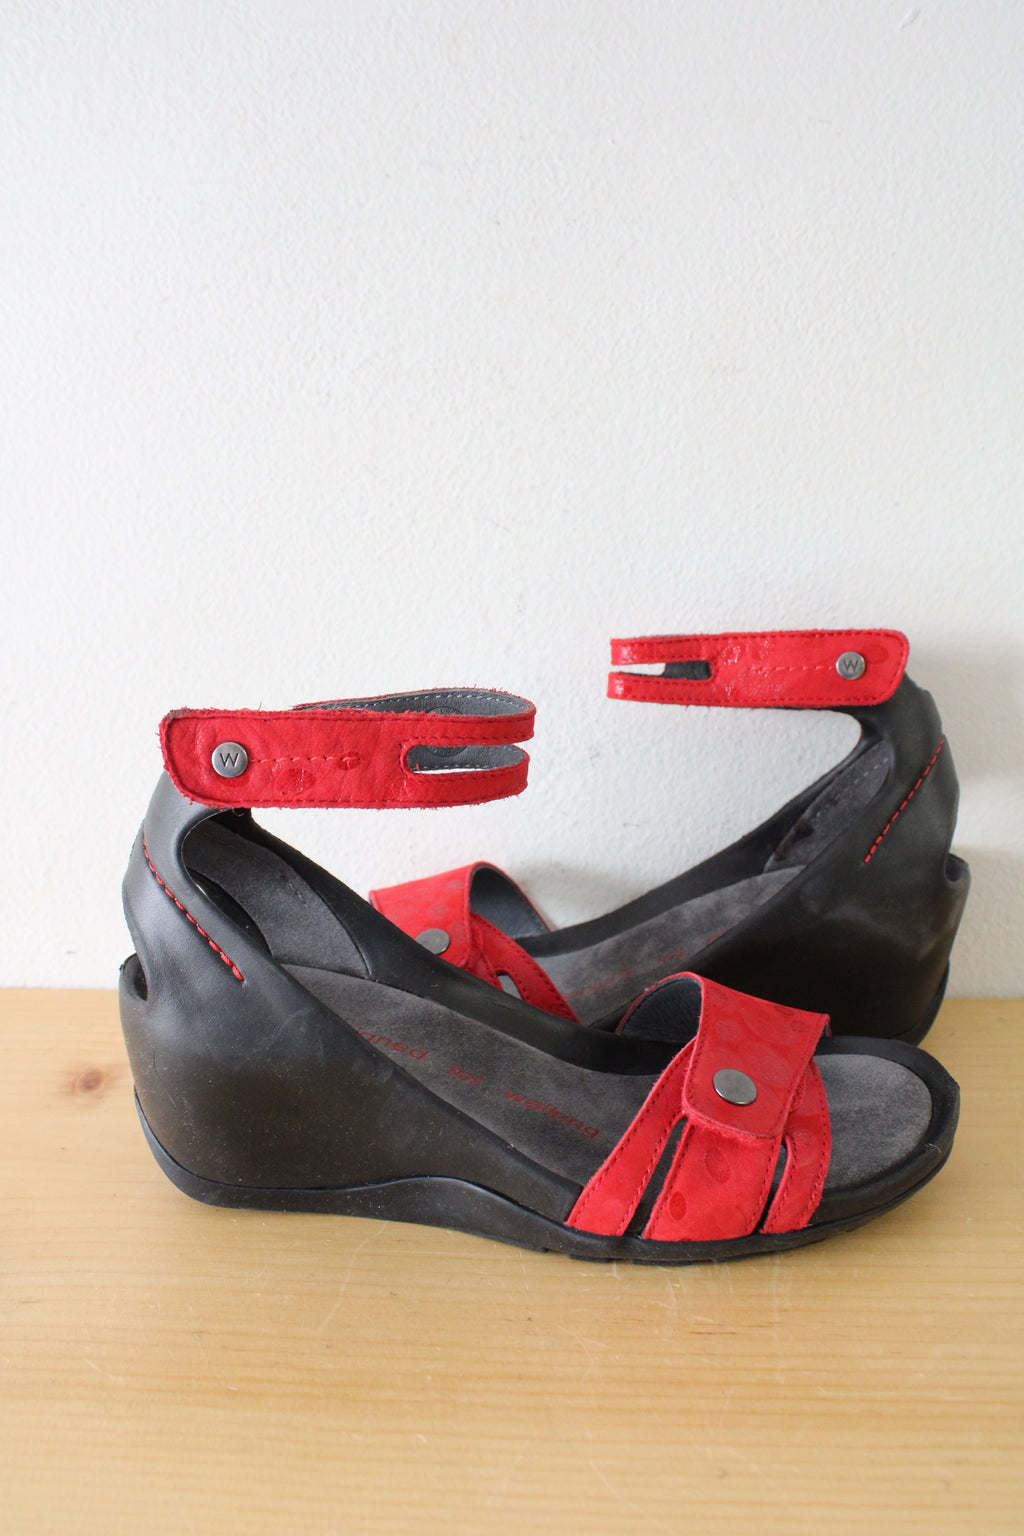 Wolky Red Sandals with Velcro Strap